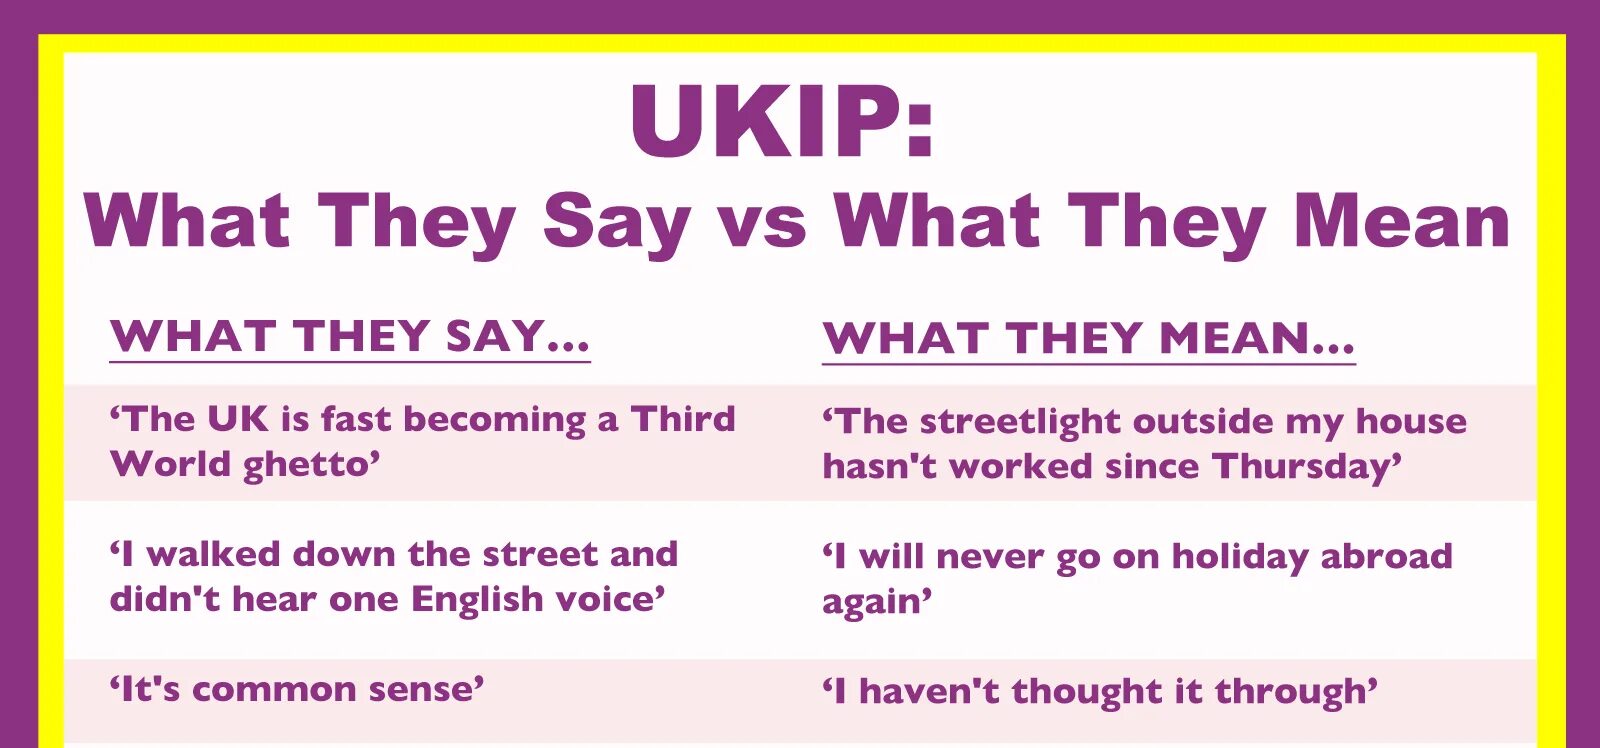 What English say and what they mean. What is mean. What Brits say and what they mean. What the English say mean.